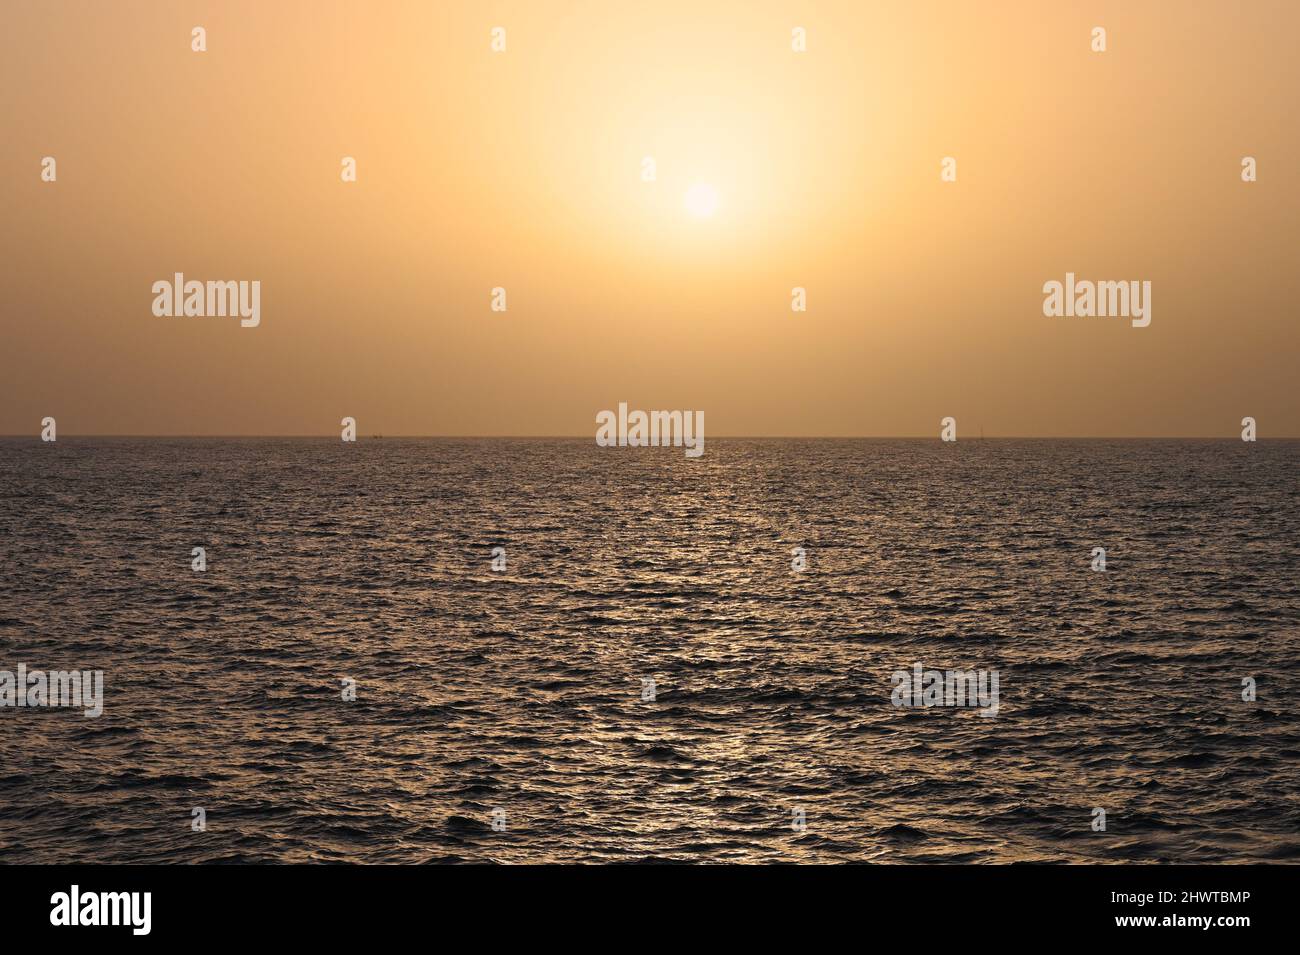 A view of the sunset over the Atlantic Ocean, in Costa Adeje, Tenerife, Spain, with the glistening beams of the sun reflecting on the ocean Stock Photo